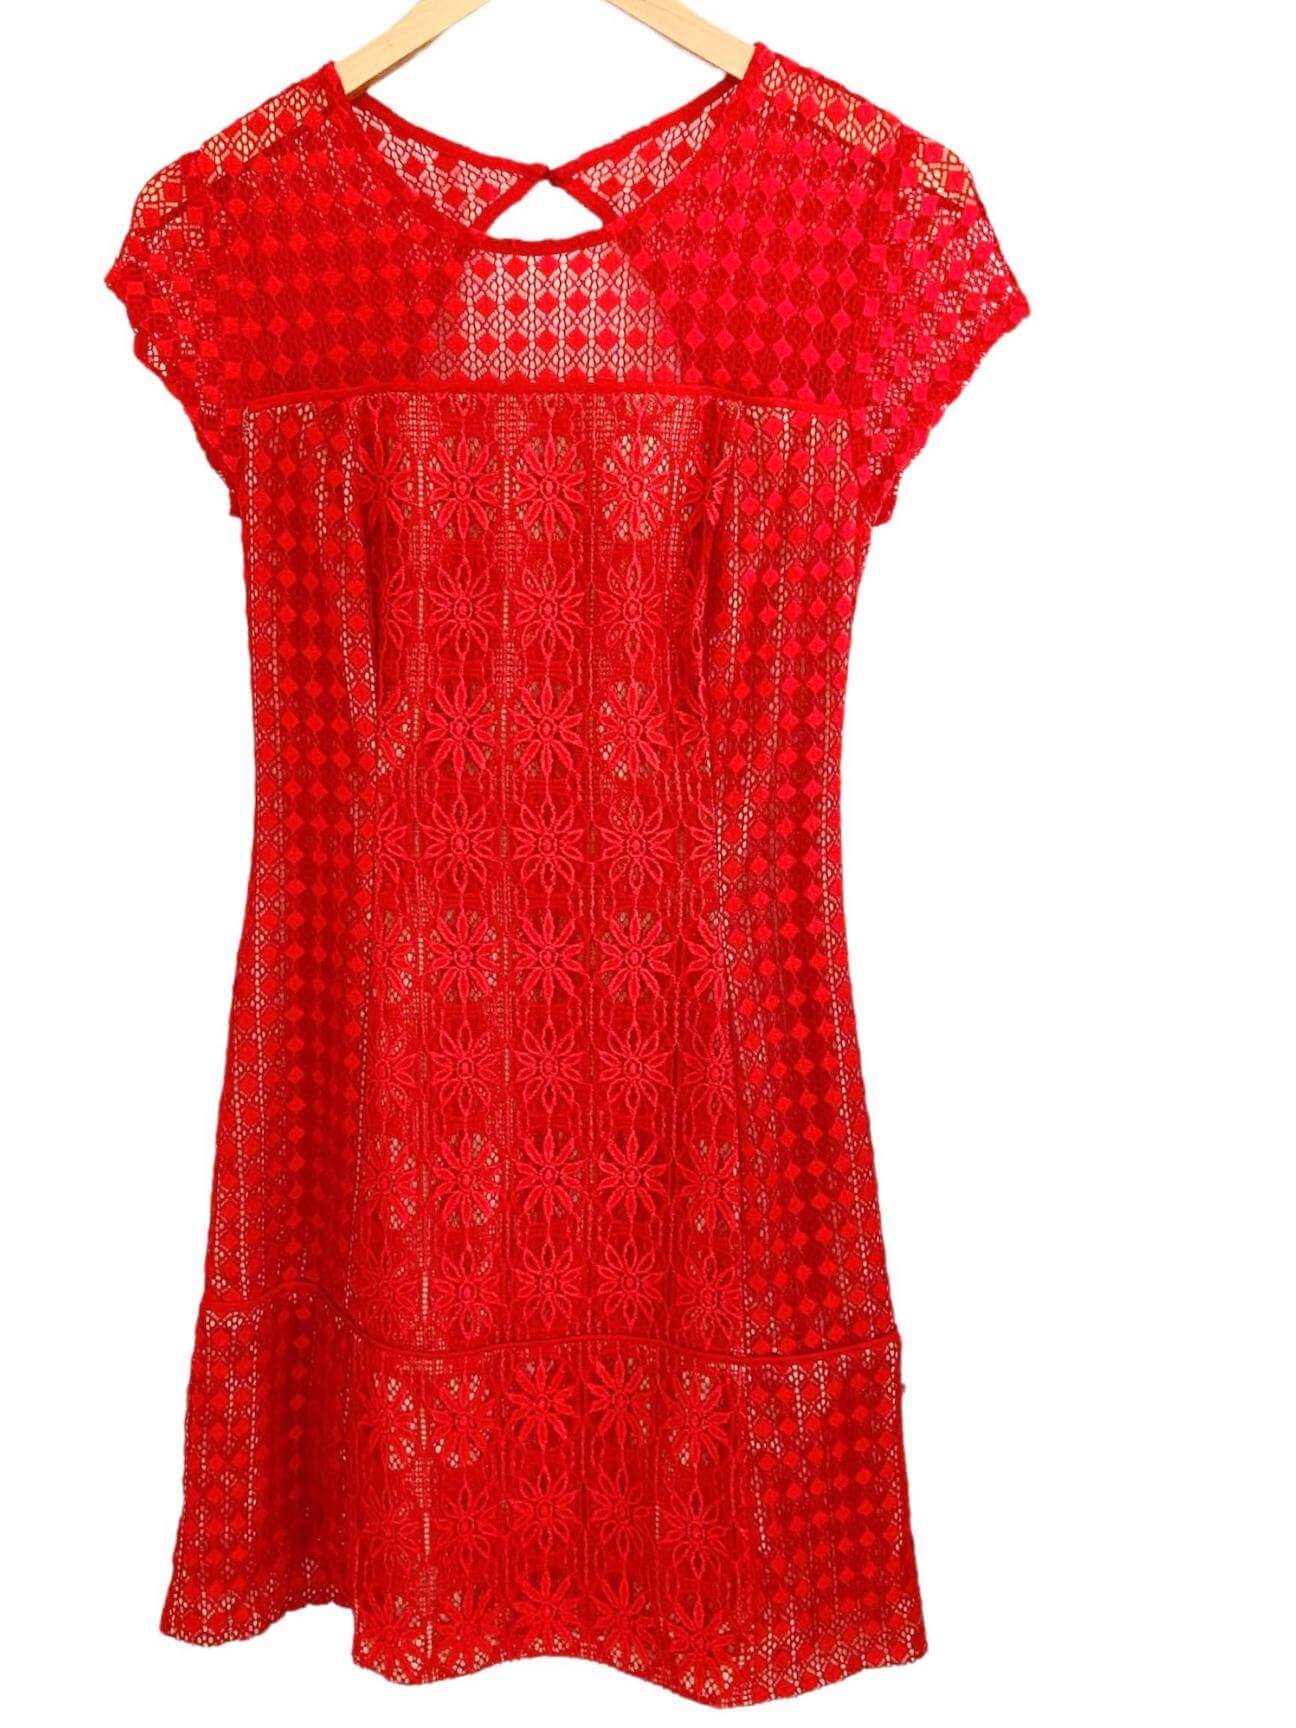 Bright Spring JESSICA SIMPSON red lace dress